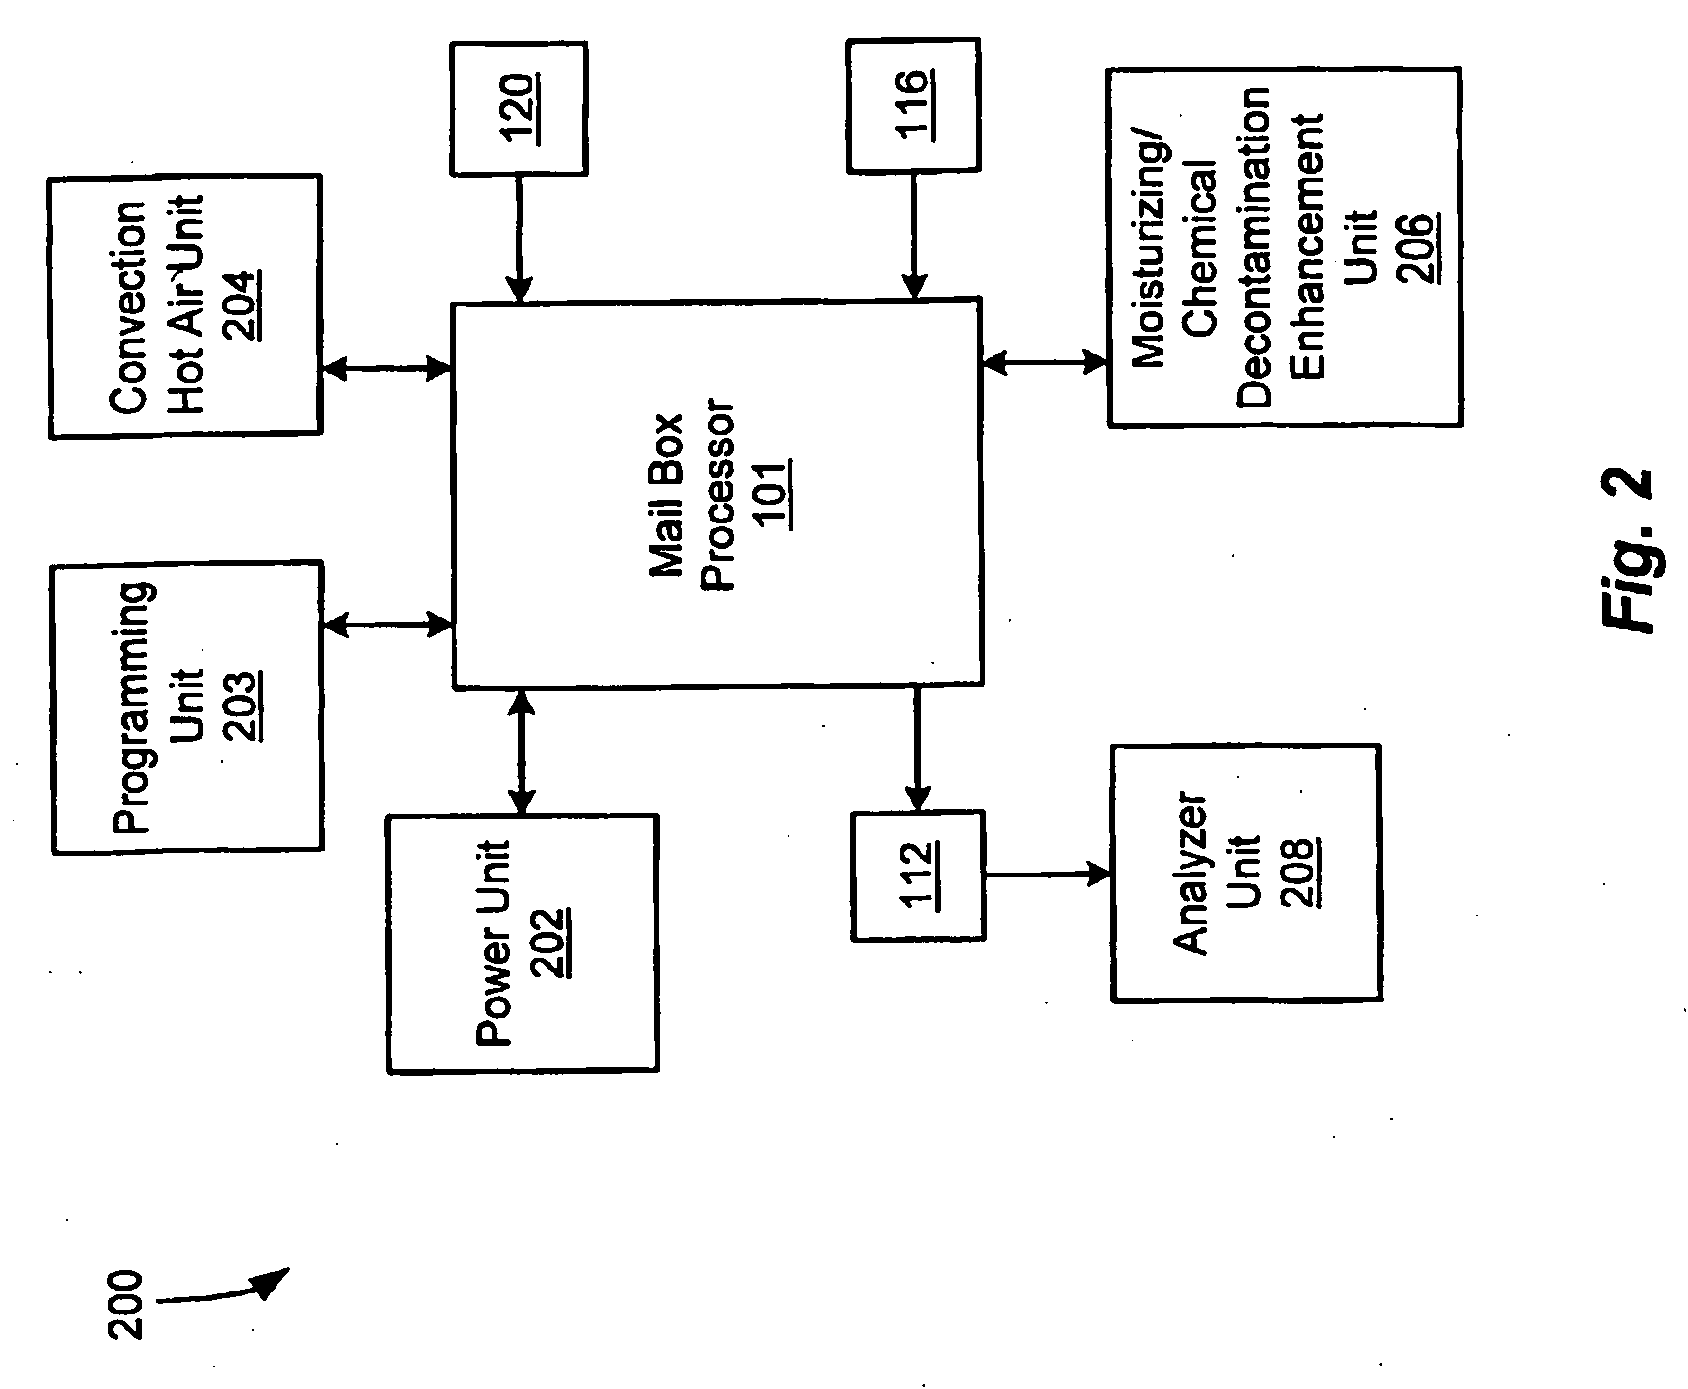 Article processing apparatus and related methods